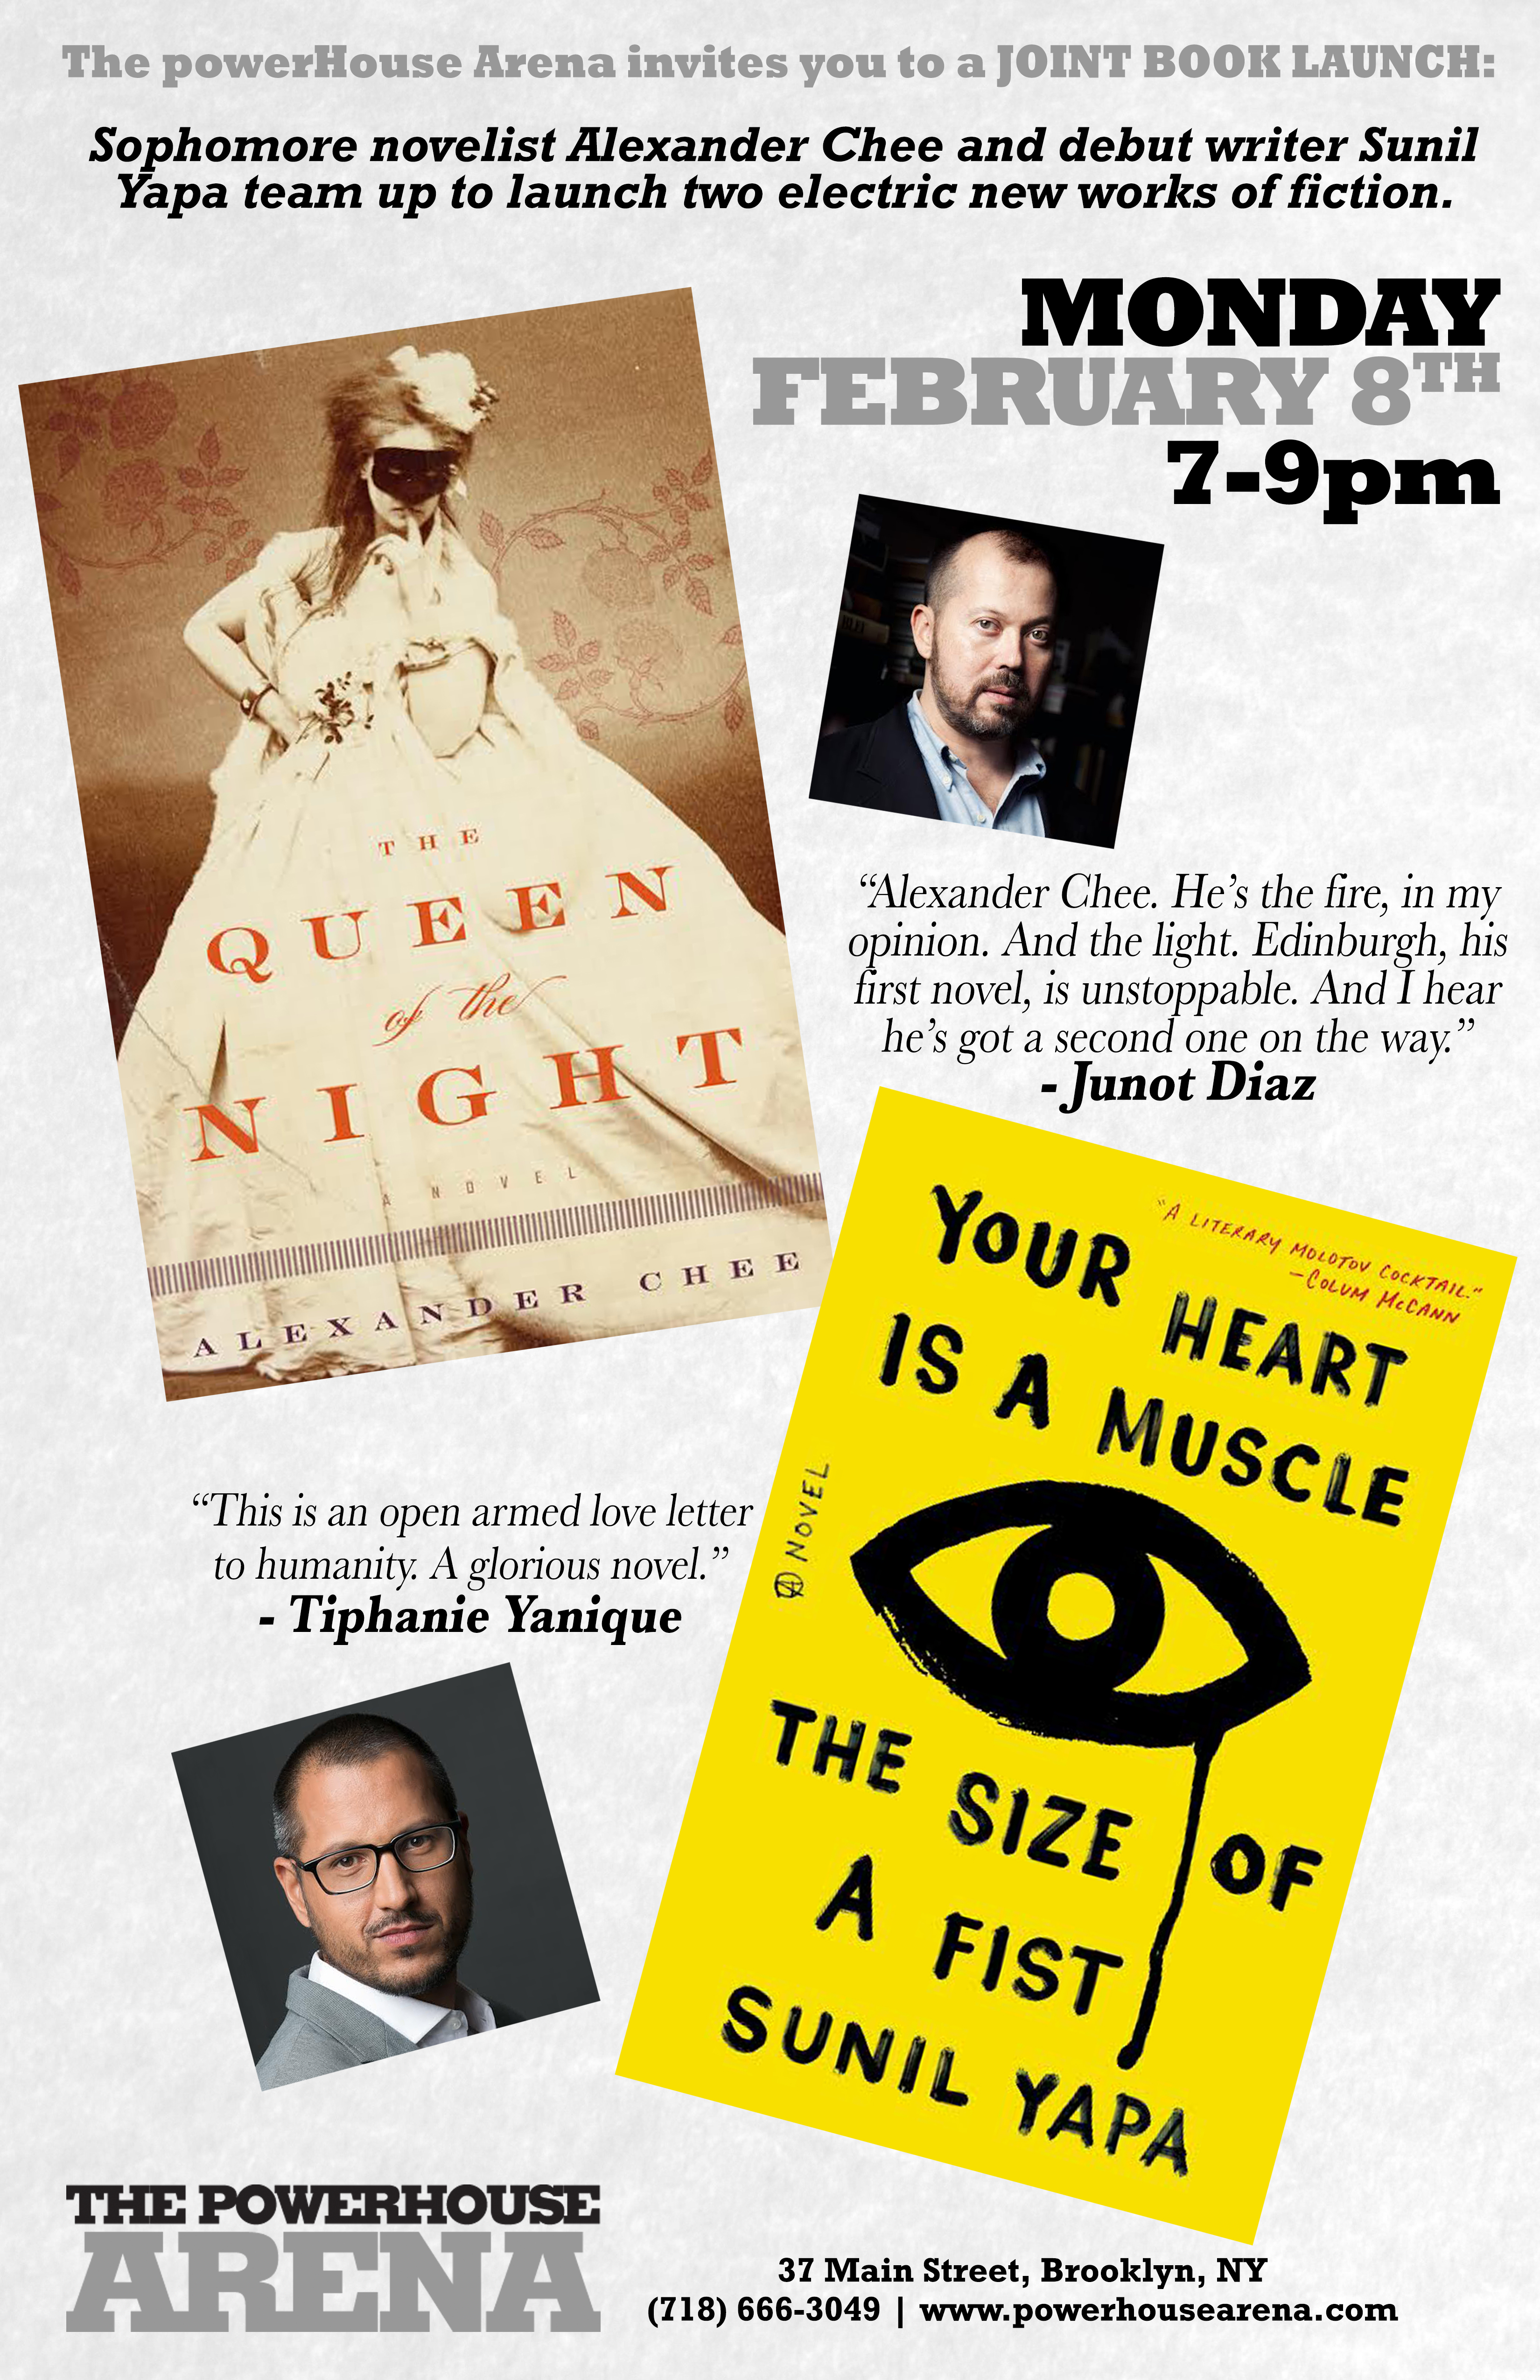 Joint Book Launch: The Queen of the Night by Alexander Chee and Your Heart is a Muscle the Size of a Fist by Sunil Yapa